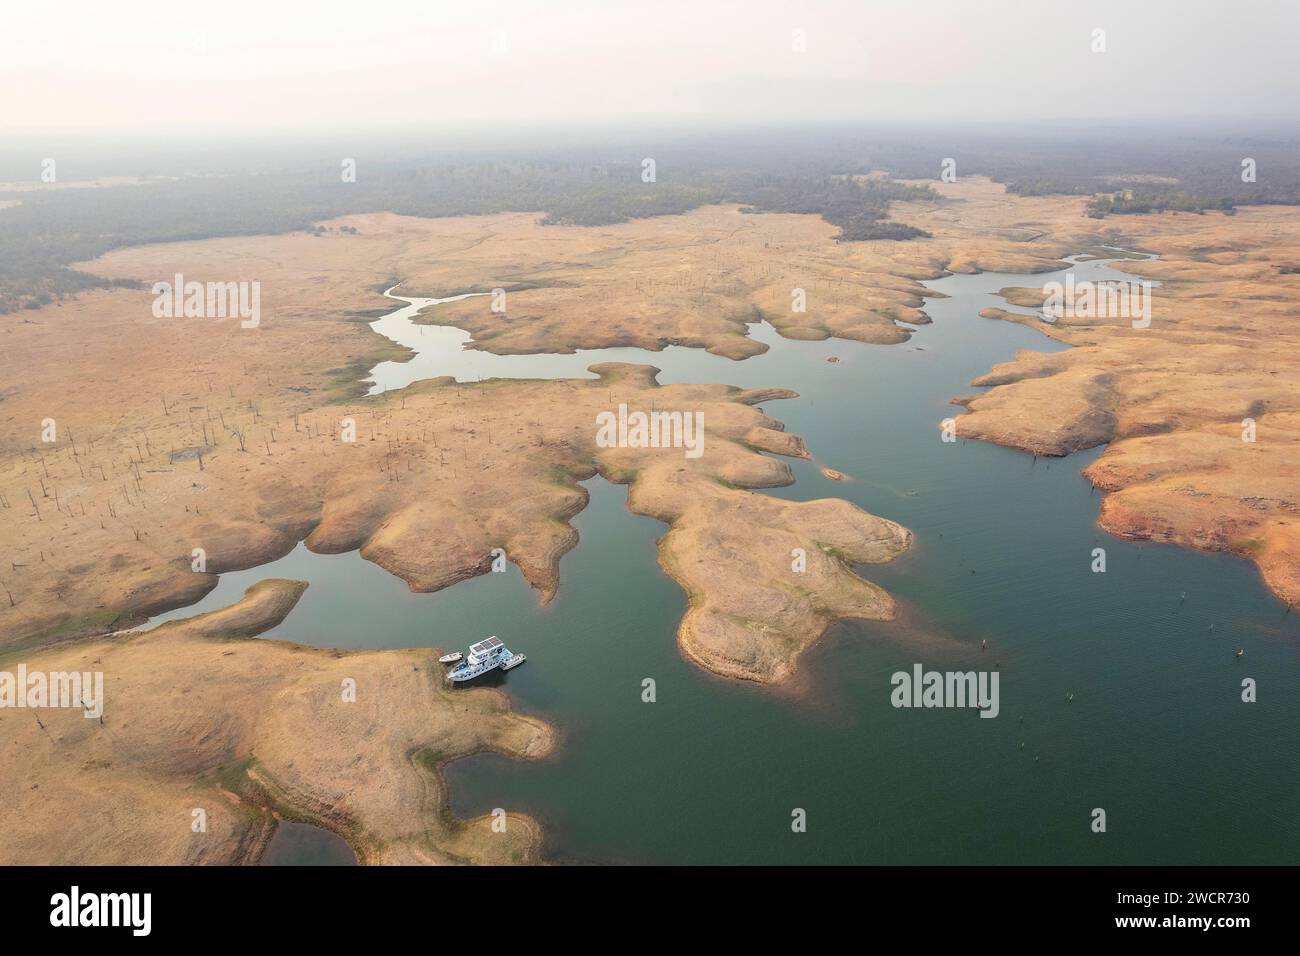 A houseboat can be seen in this aerial image of Lake Kariba, Zimbabwe. Stock Photo